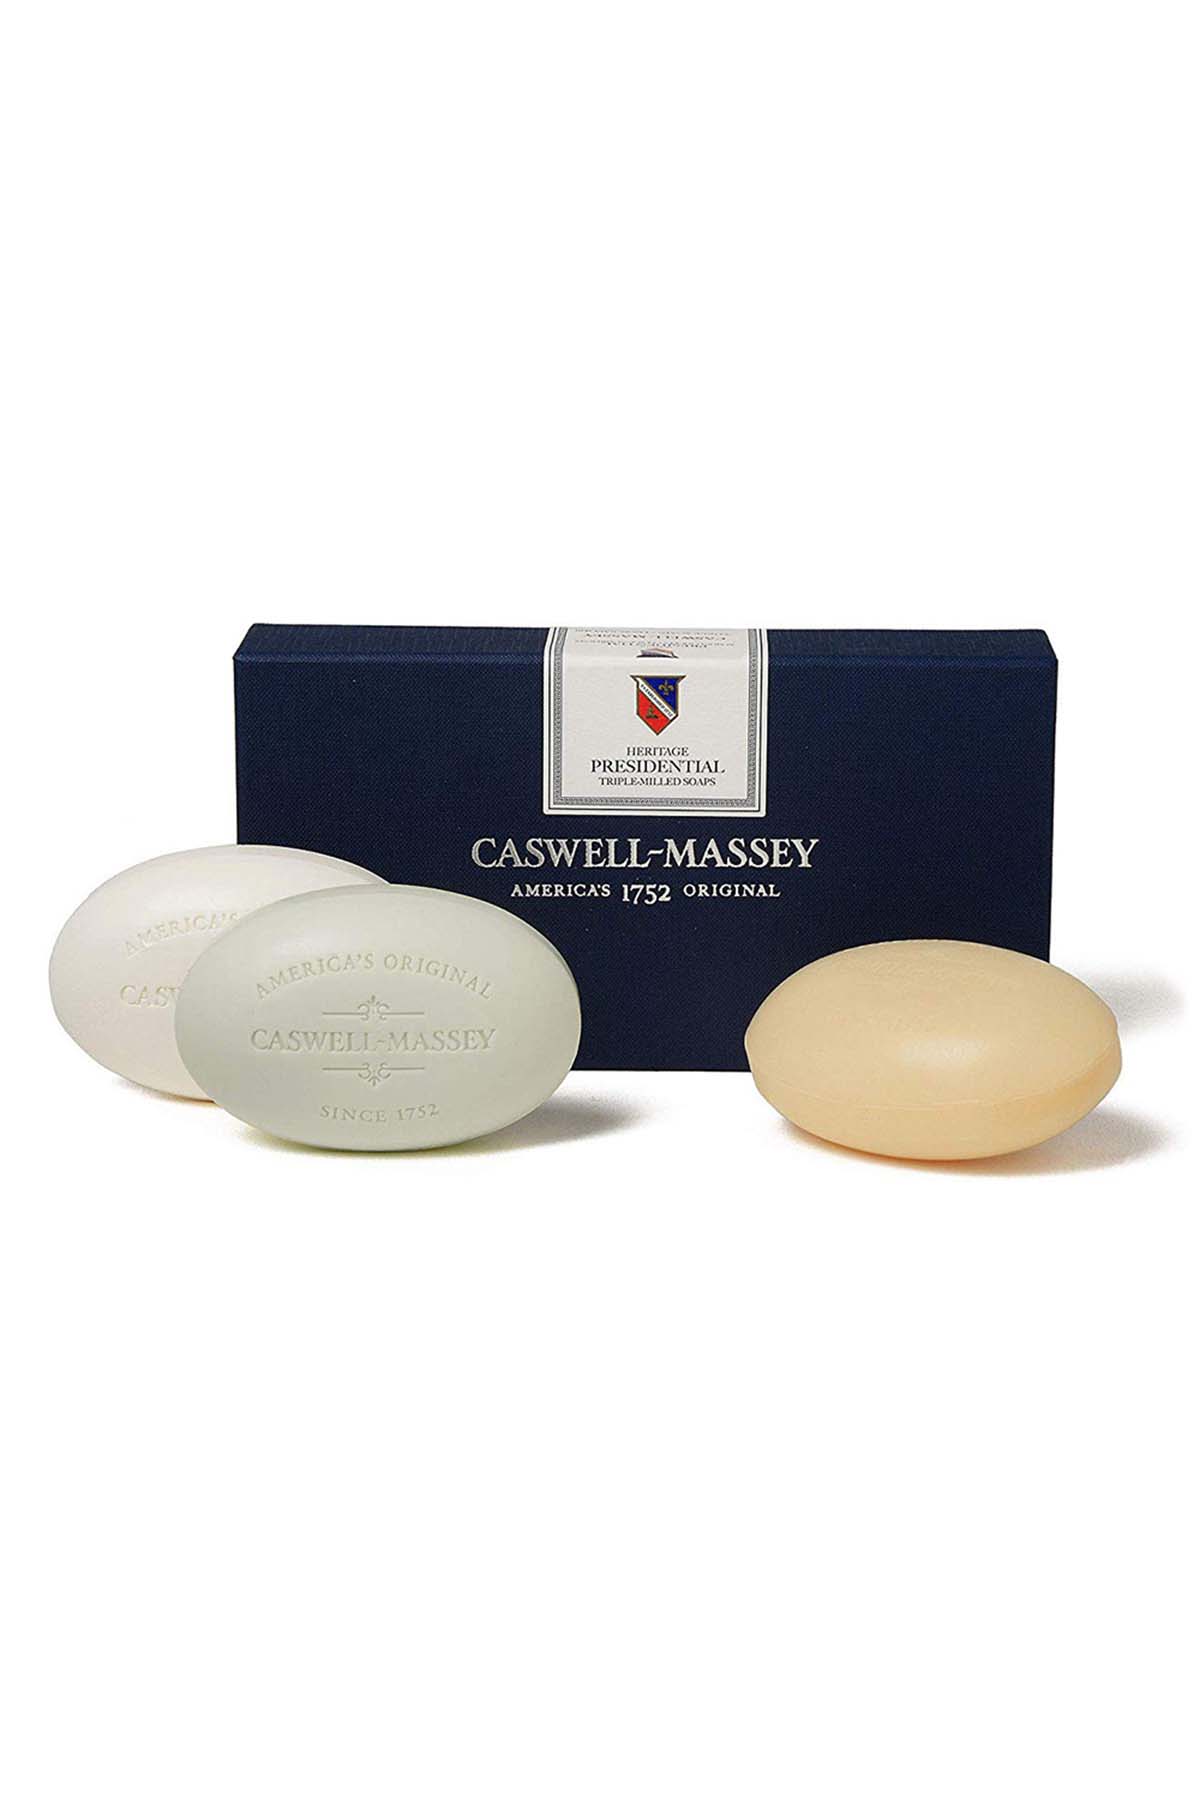 Caswell-Massey Heritage Presidential Three Soap Set